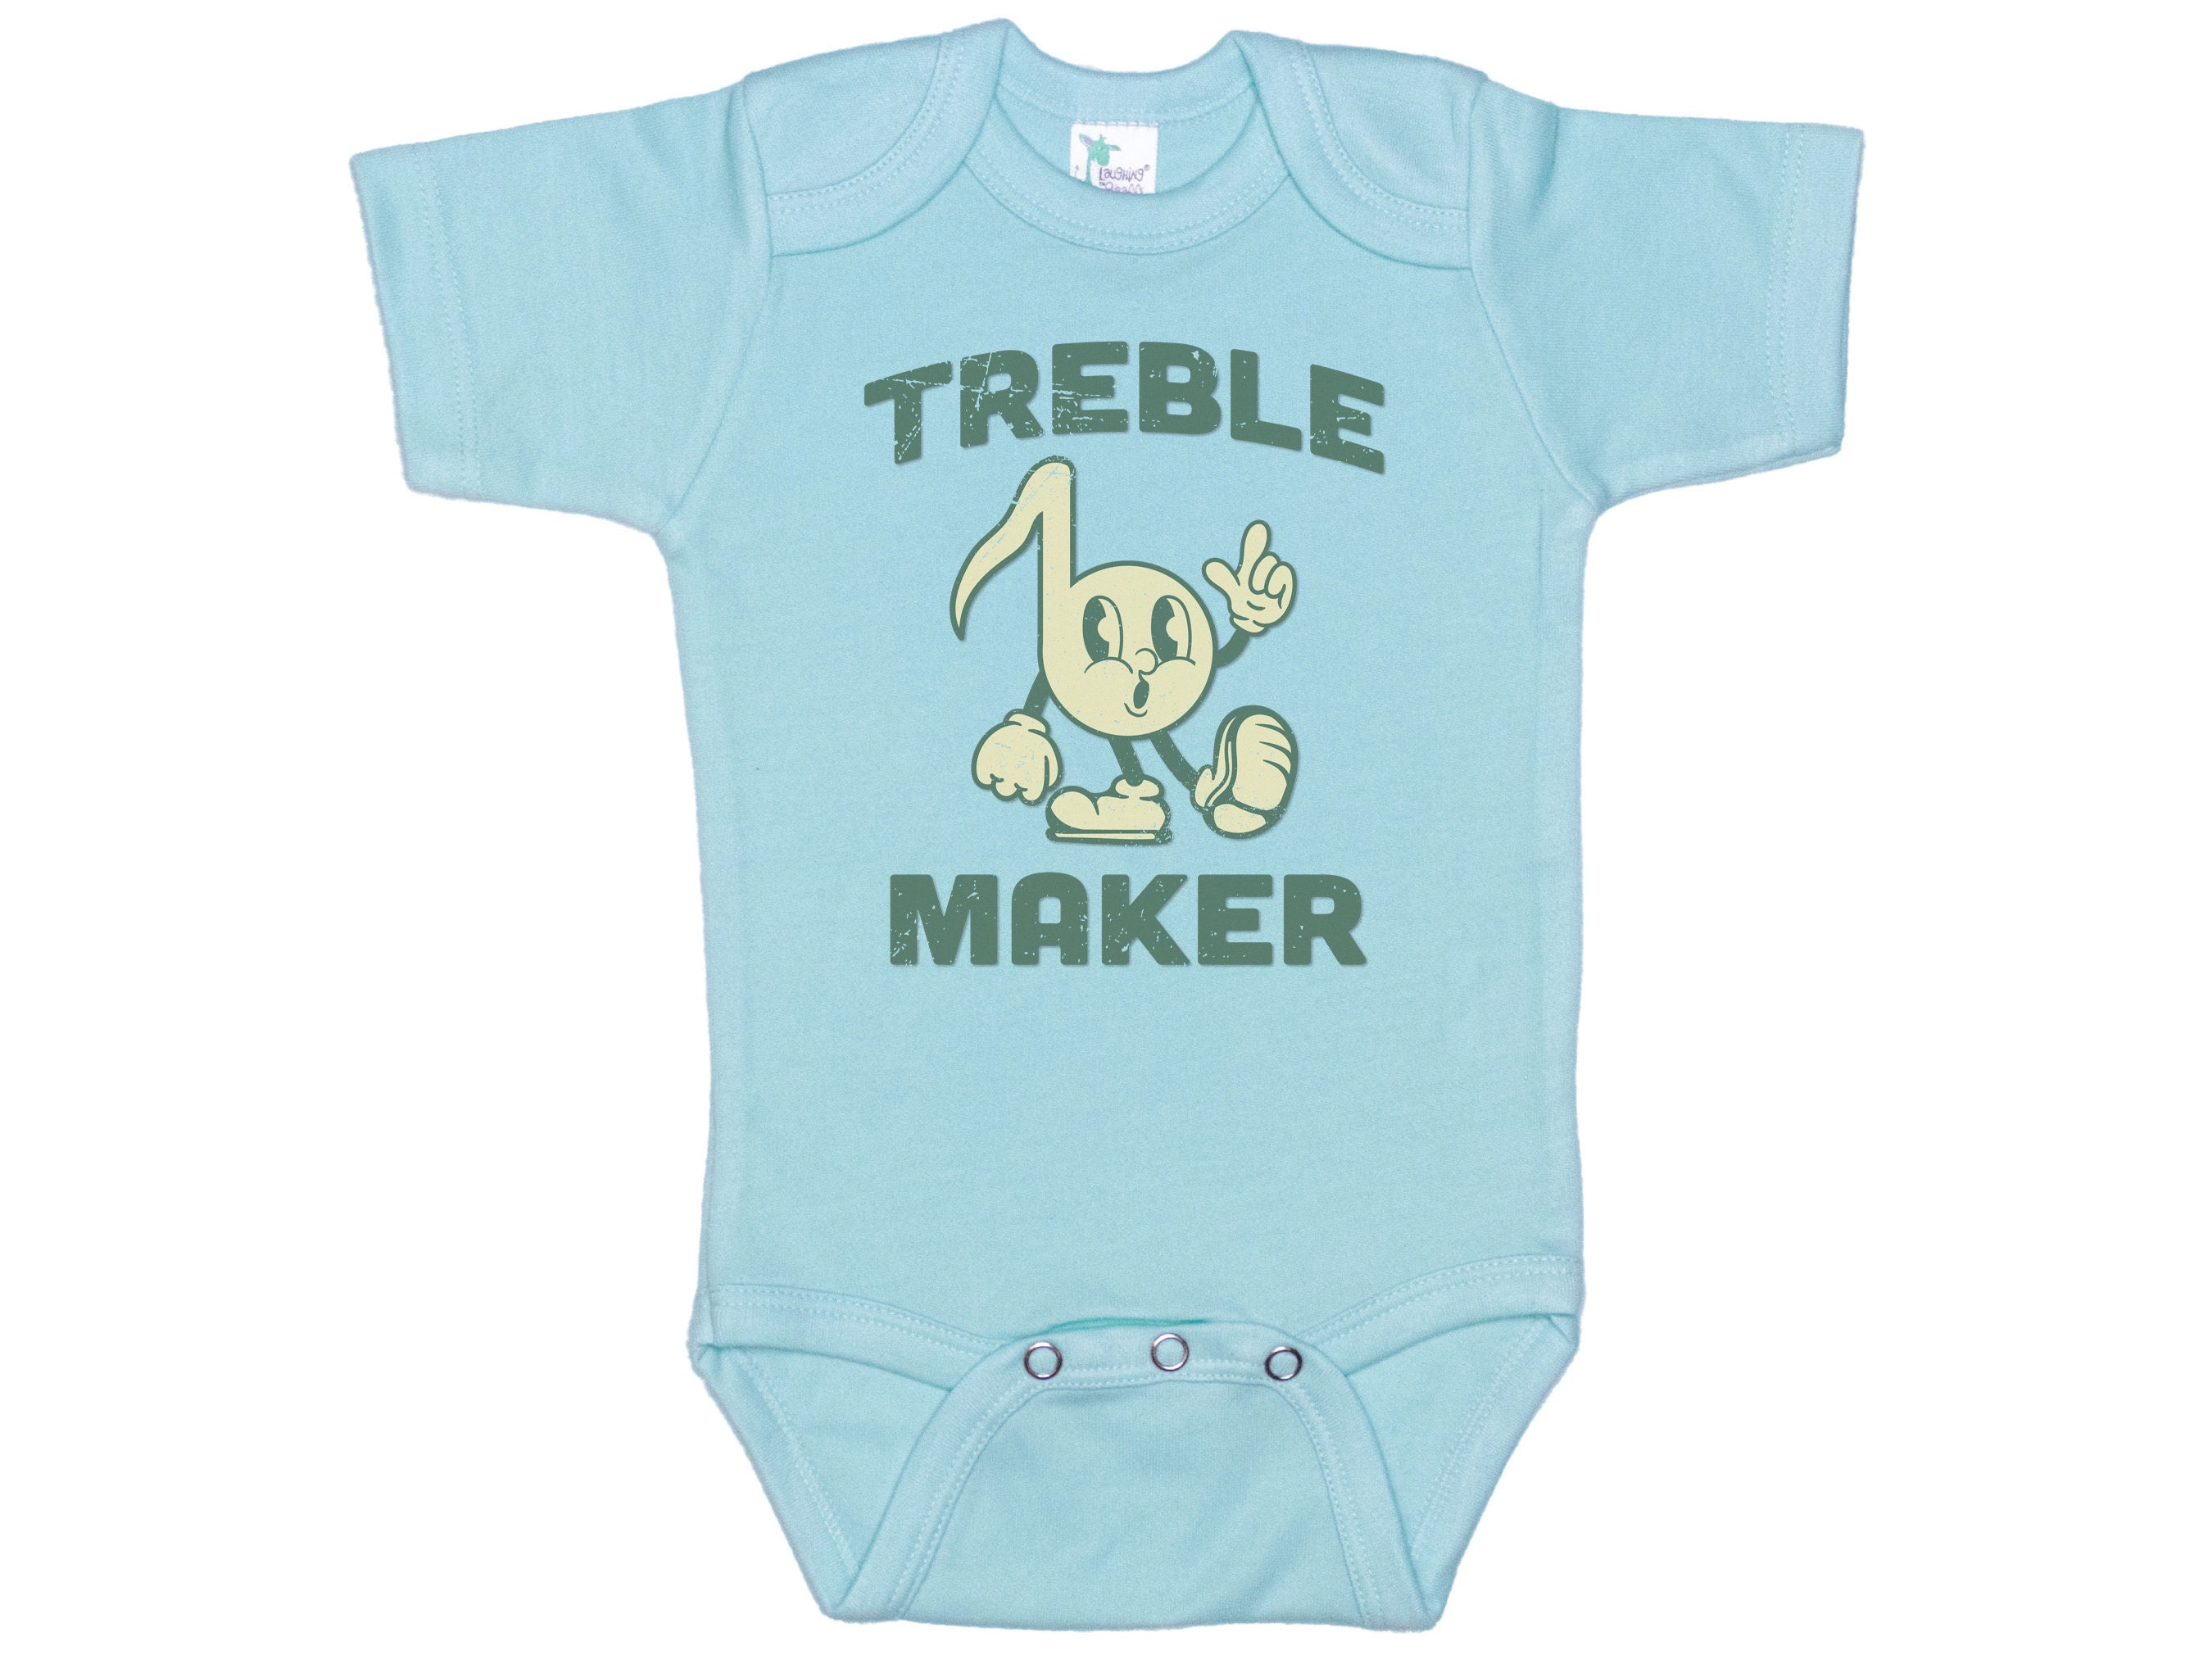 Music Onesie®, Treble Maker, Music Bodysuit, Funny Baby Outfit, Baby Gift,  Baby Announcement, Music Romper, Treble Clef, Music Apparel 